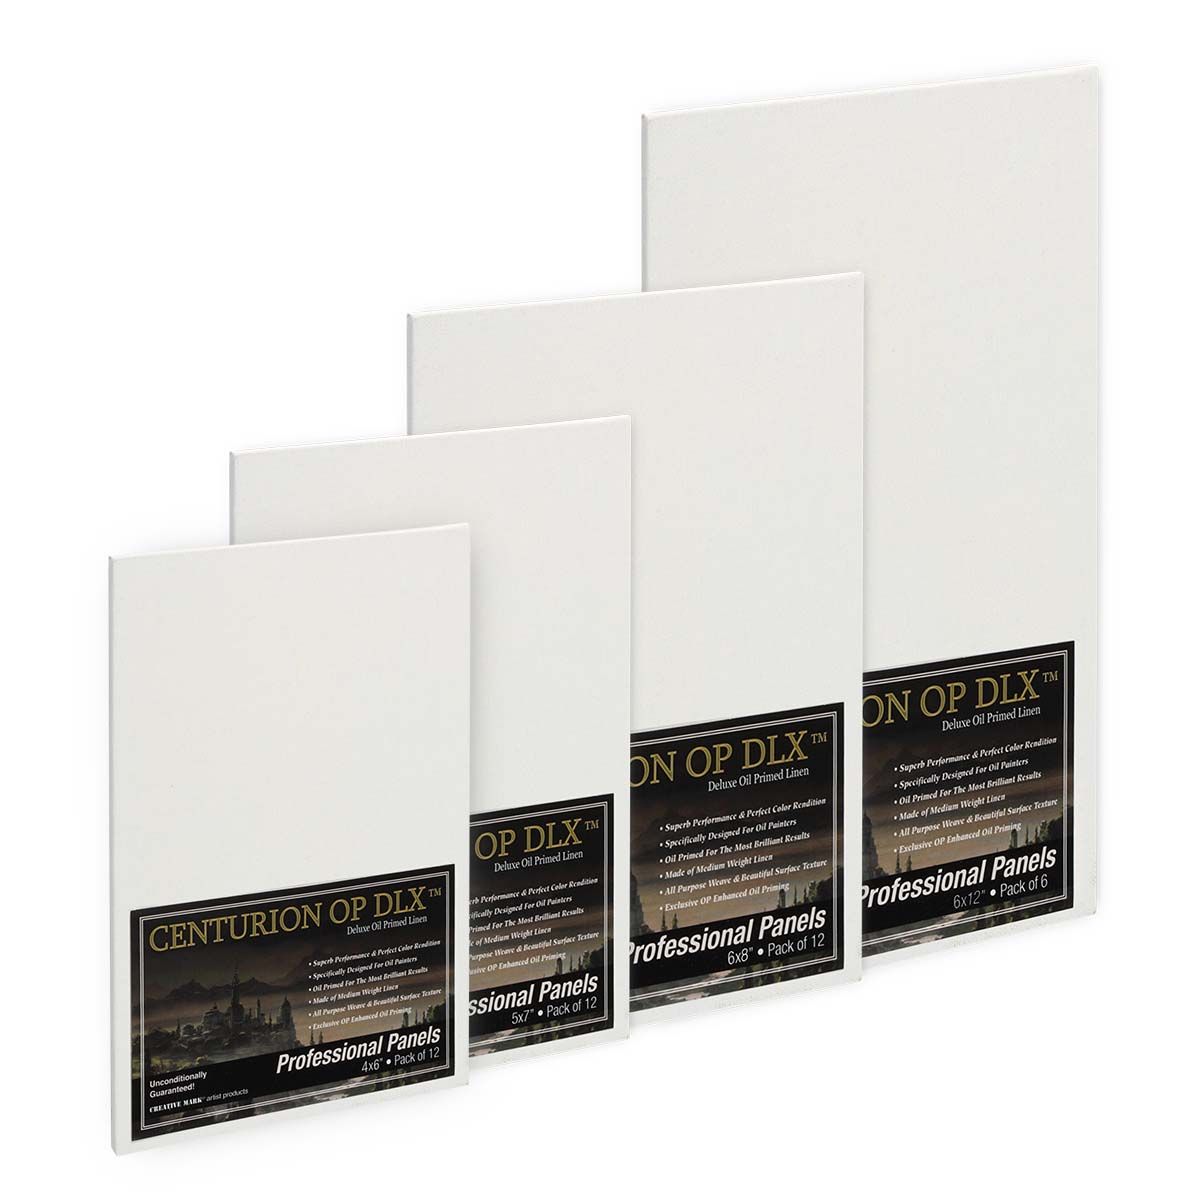 Centurion Universal Acrylic Primed Linen Panels -4x4Canvases for Painting  - 3 pack of Canvases for Oils, Acrylics, Water-Mixable Oils, and More